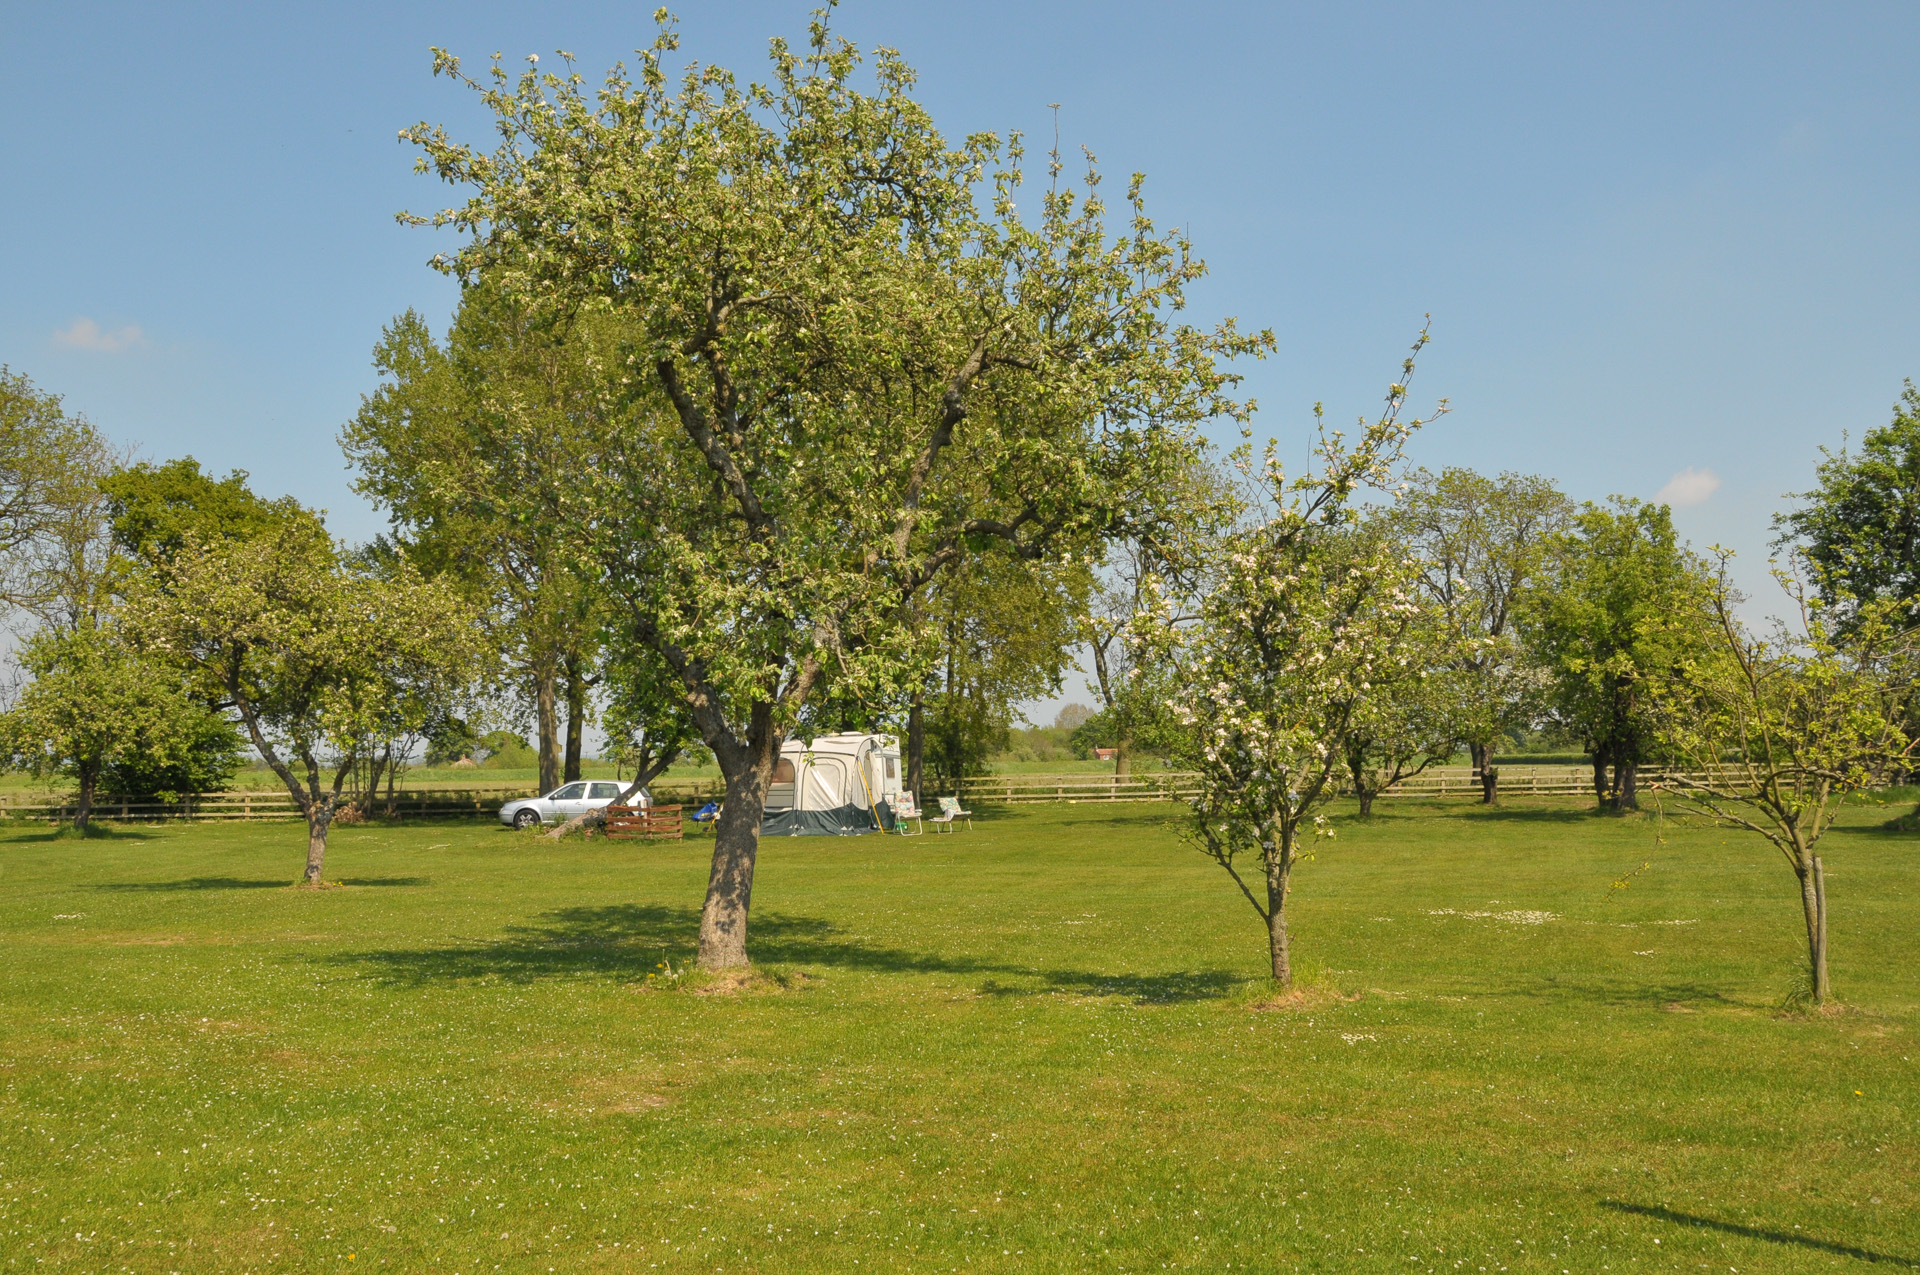 The orchard makes an idyllic setting for your holiday